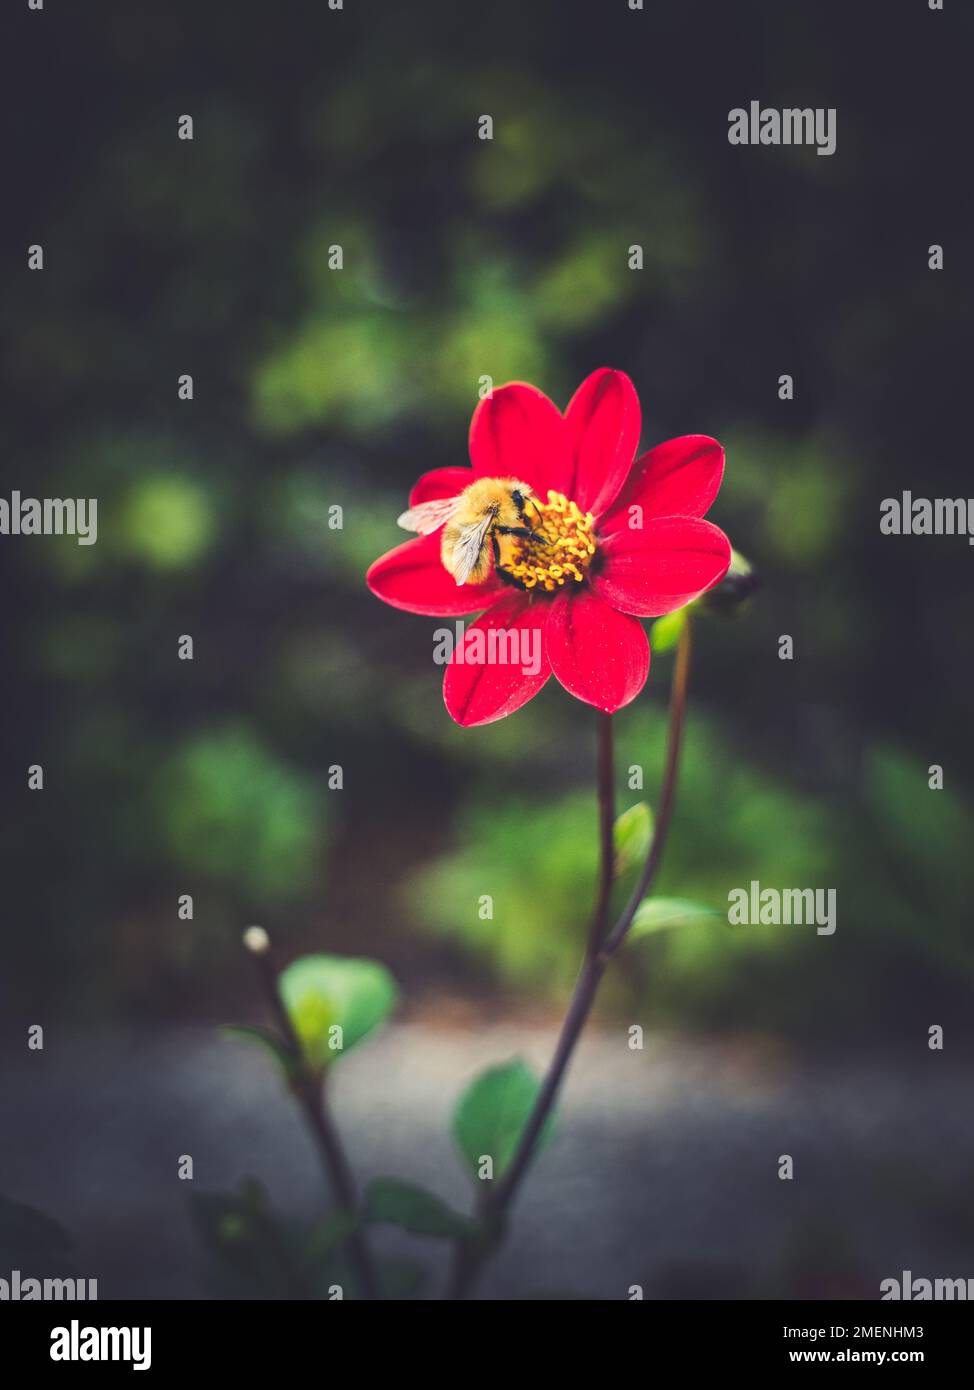 Artistic vertical photo of a bee on a red flower 'Dahlia Variabilis Liliput Red' Stock Photo